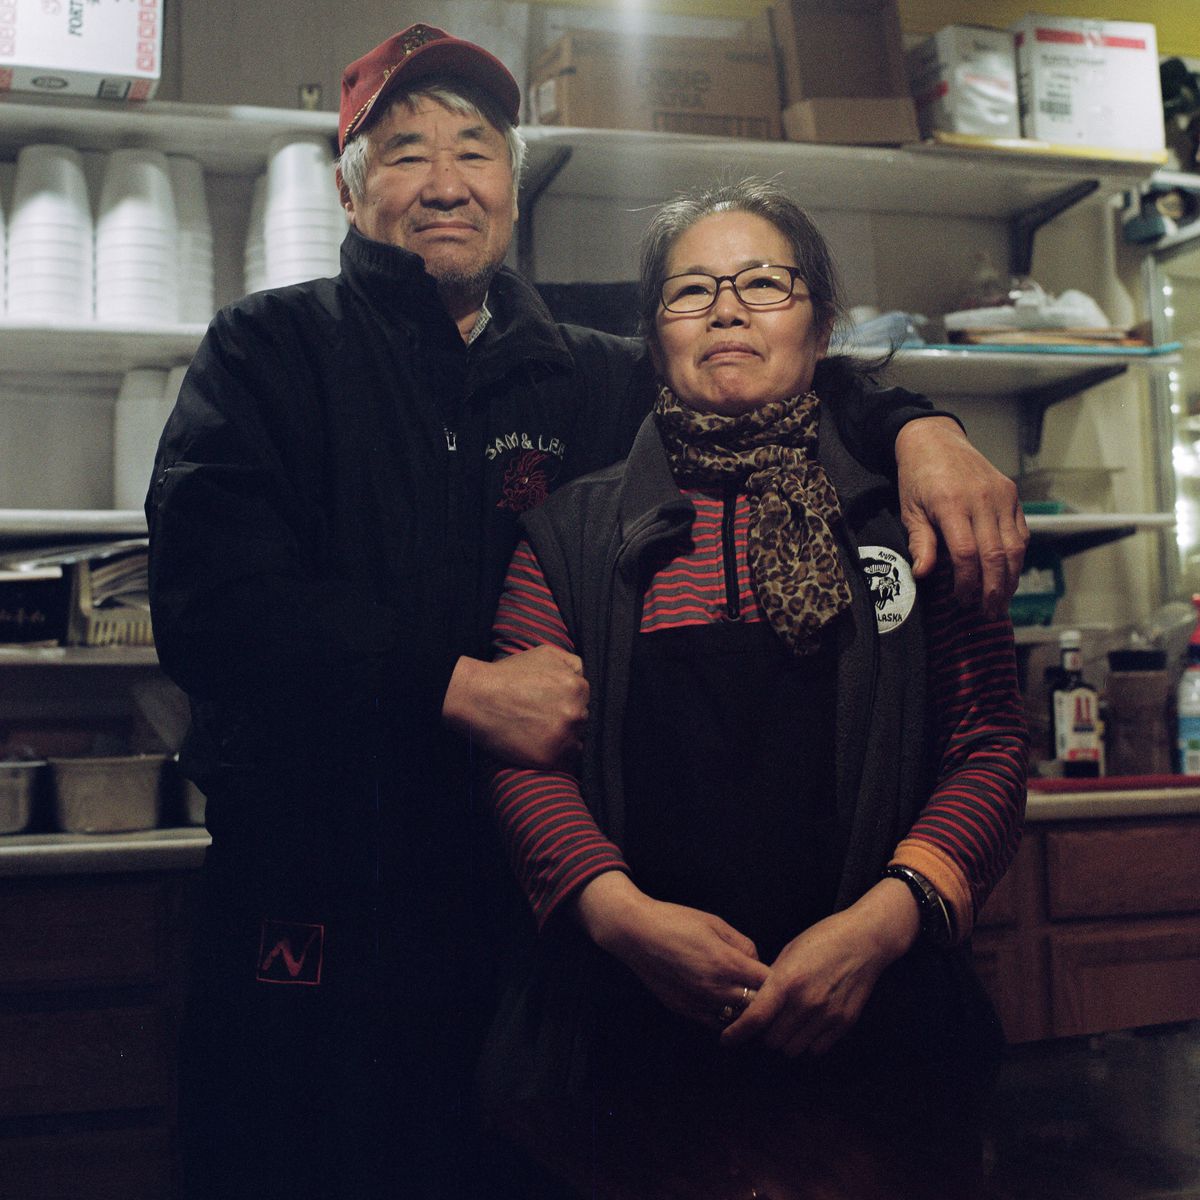 Older Korean man in a red cap stands and smiles with his arms around an older korean woman in front of commercial restaurant kitchen shelves.